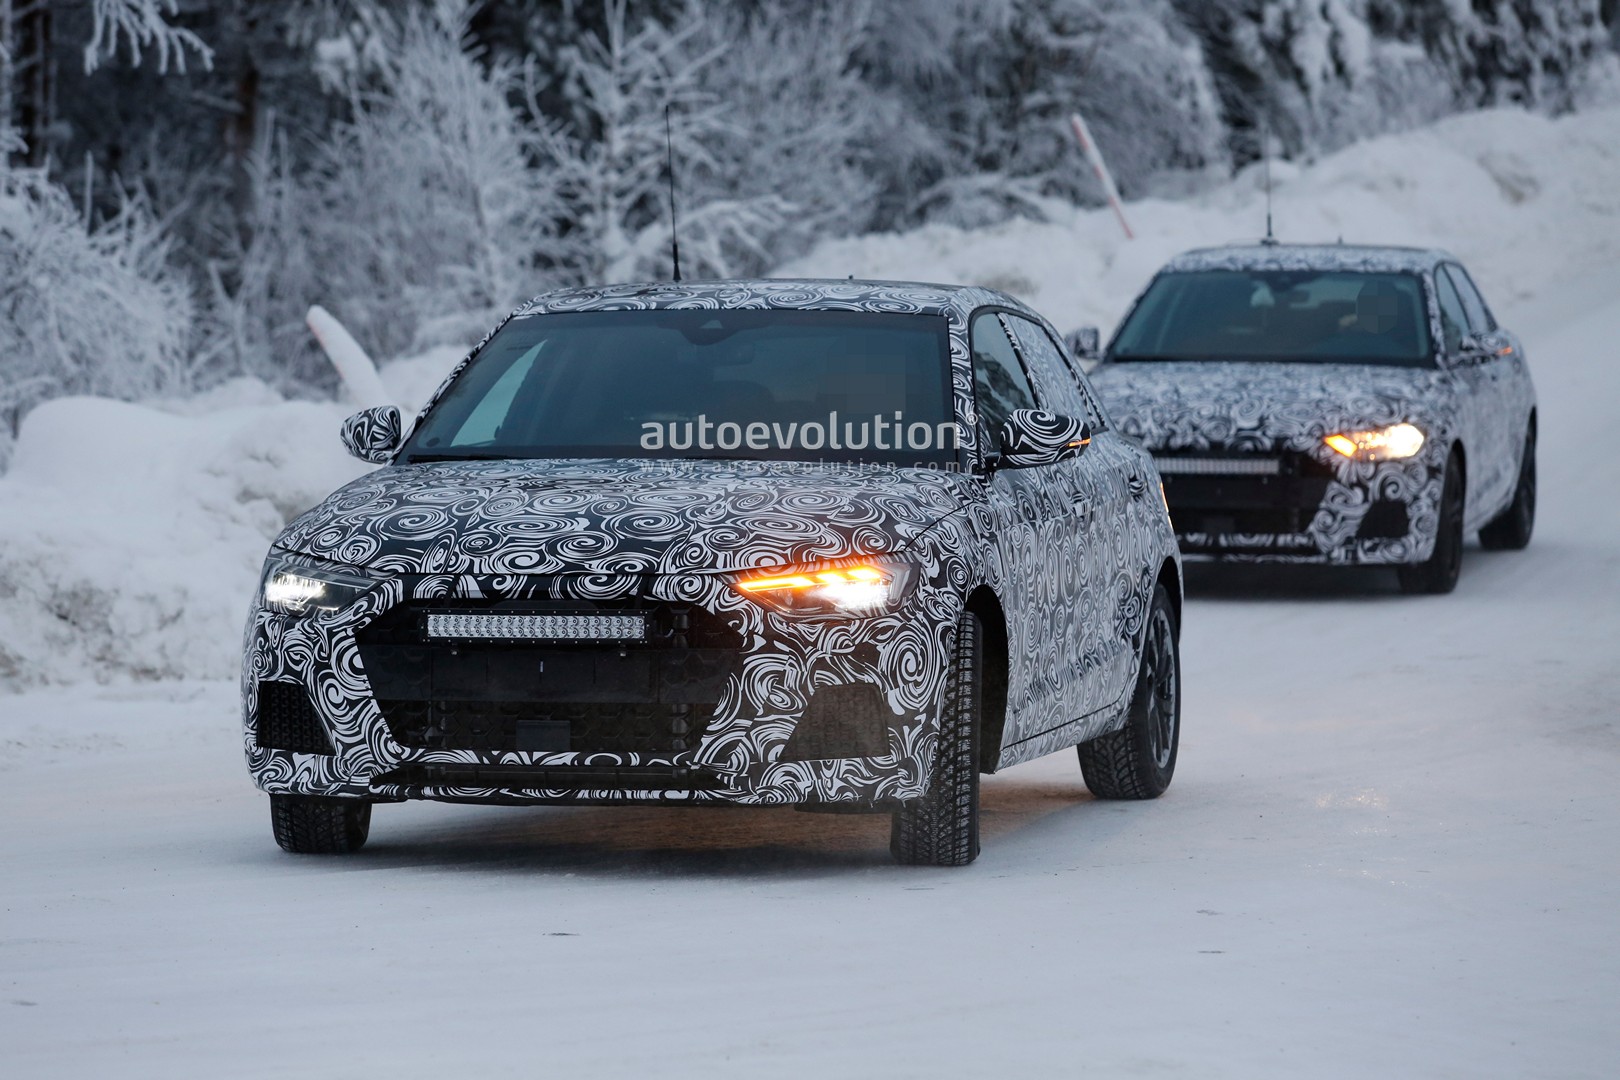 Injection Detective Planting trees 2019 Audi A1 Shows LED Headlights in Detail in Latest Spyshots